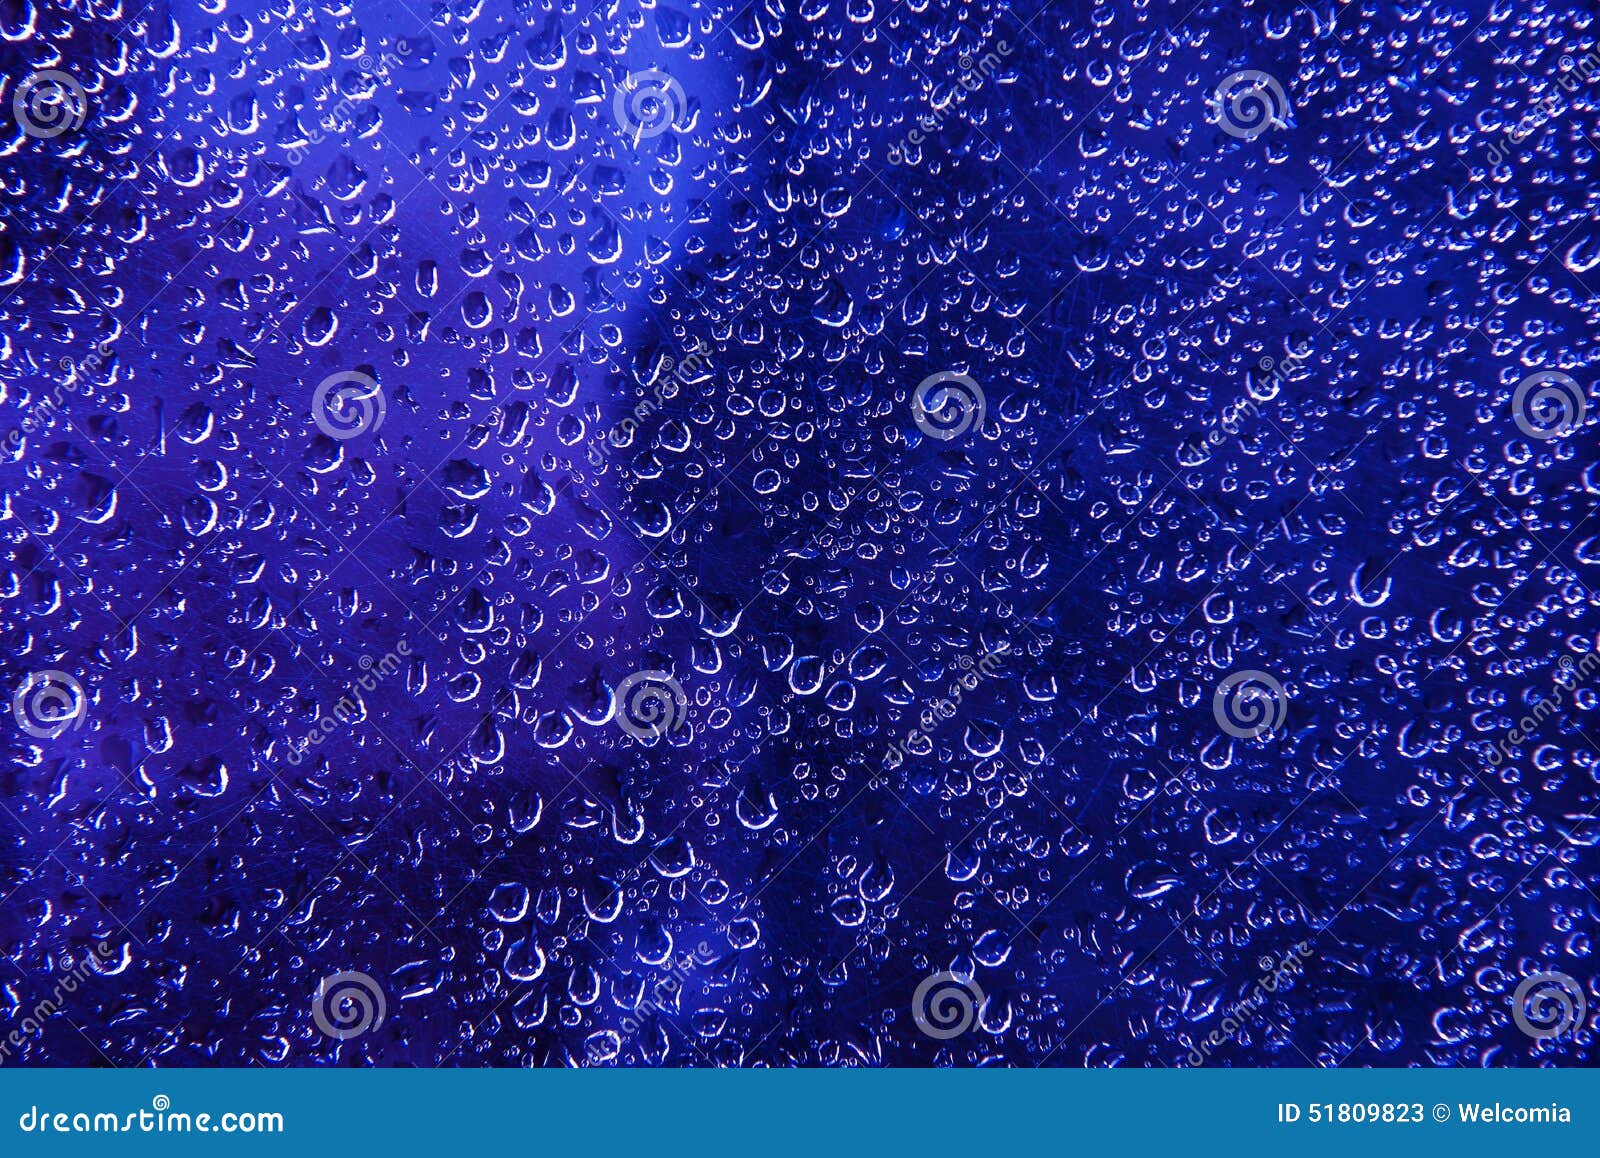 Blue Water Beads stock image. Image of rain, water, drops - 51809823